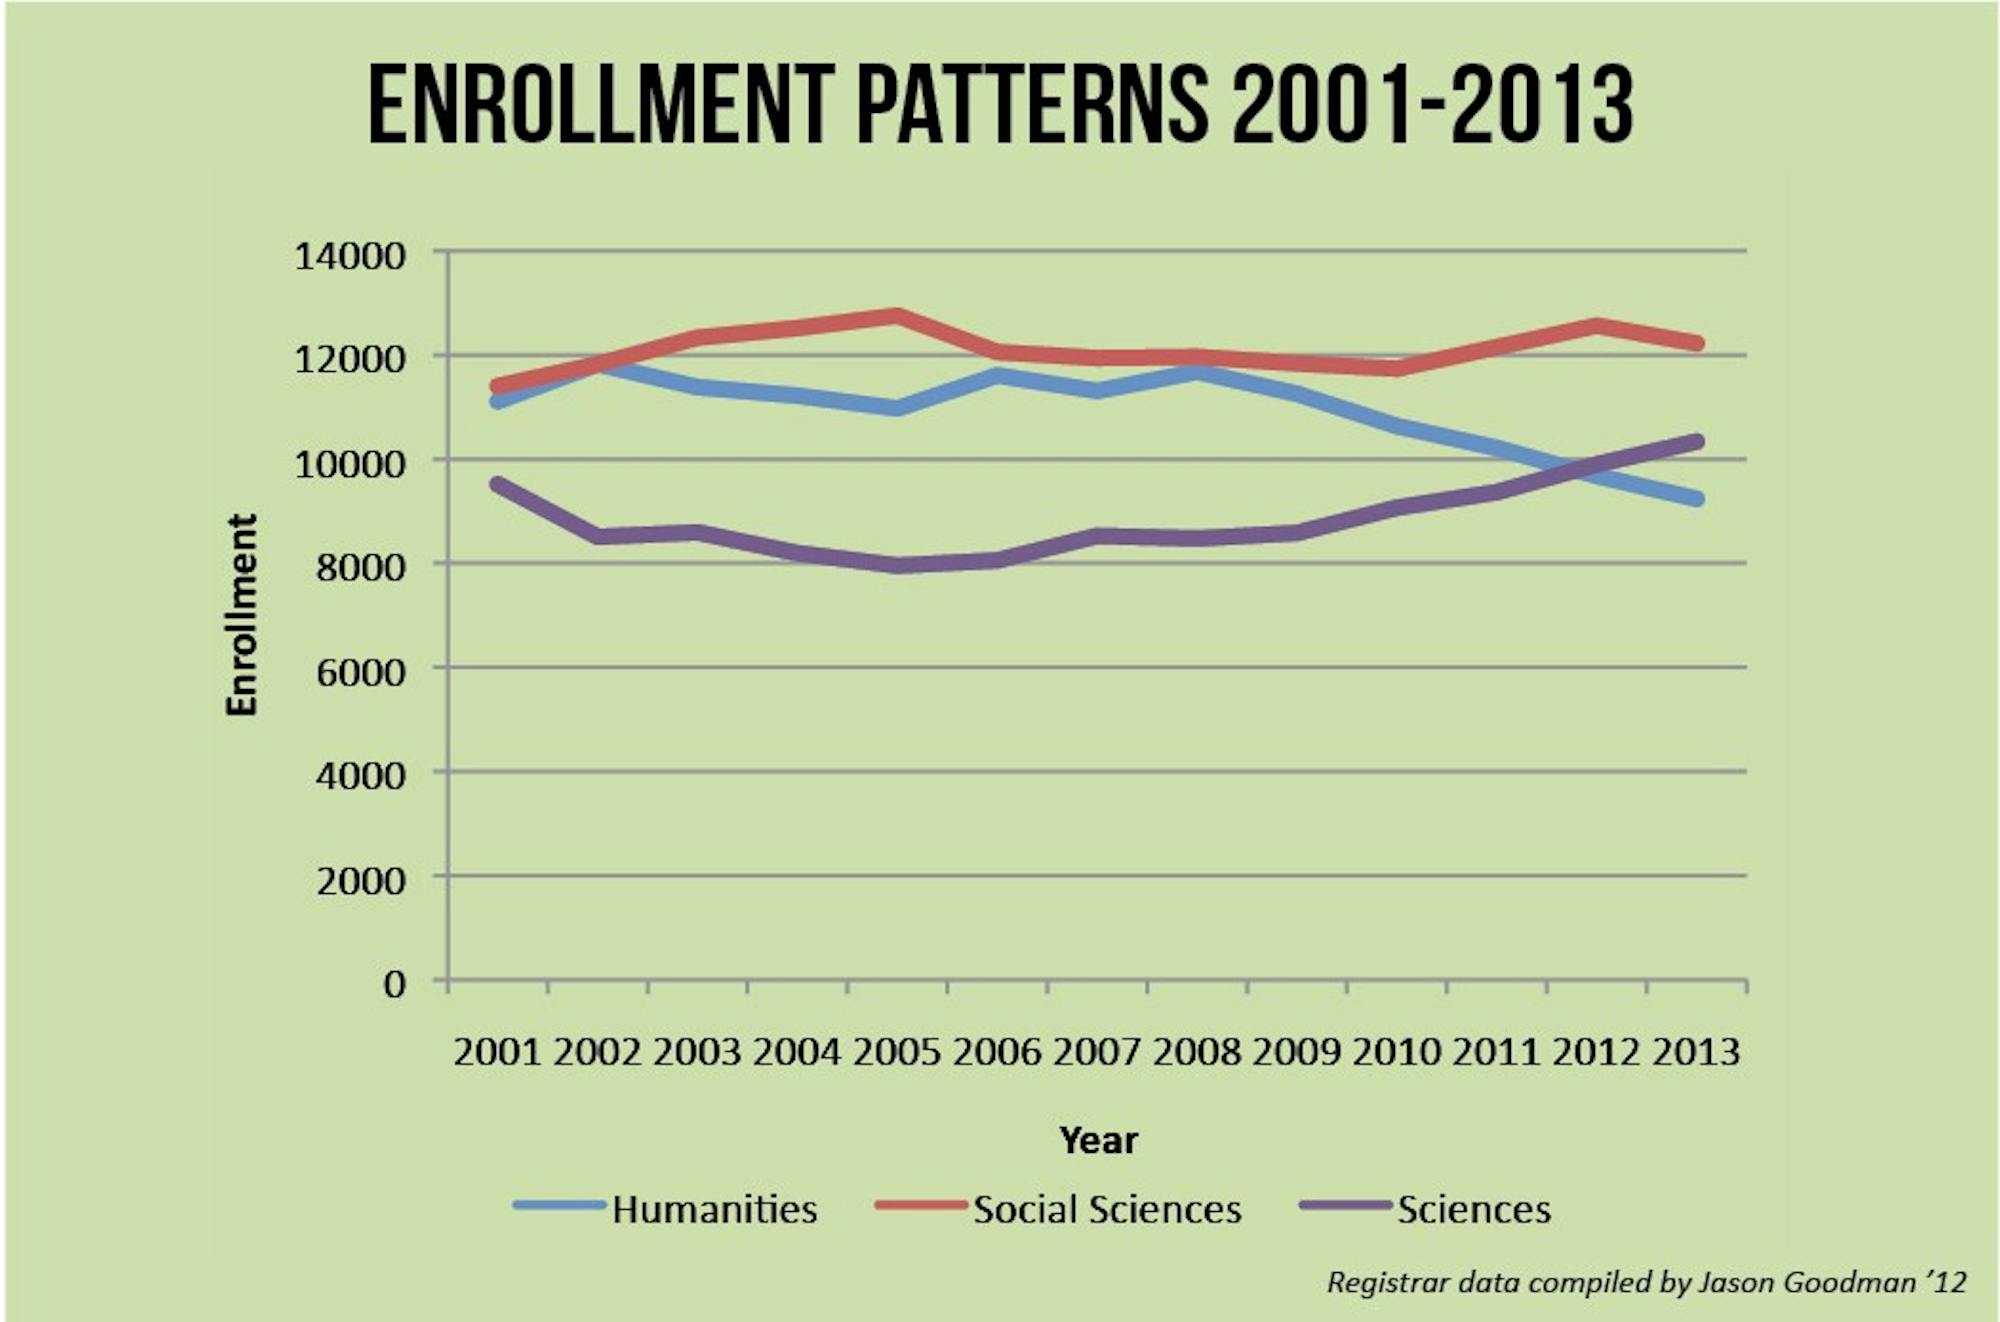 Data show declining interest in the humanities since 2008.